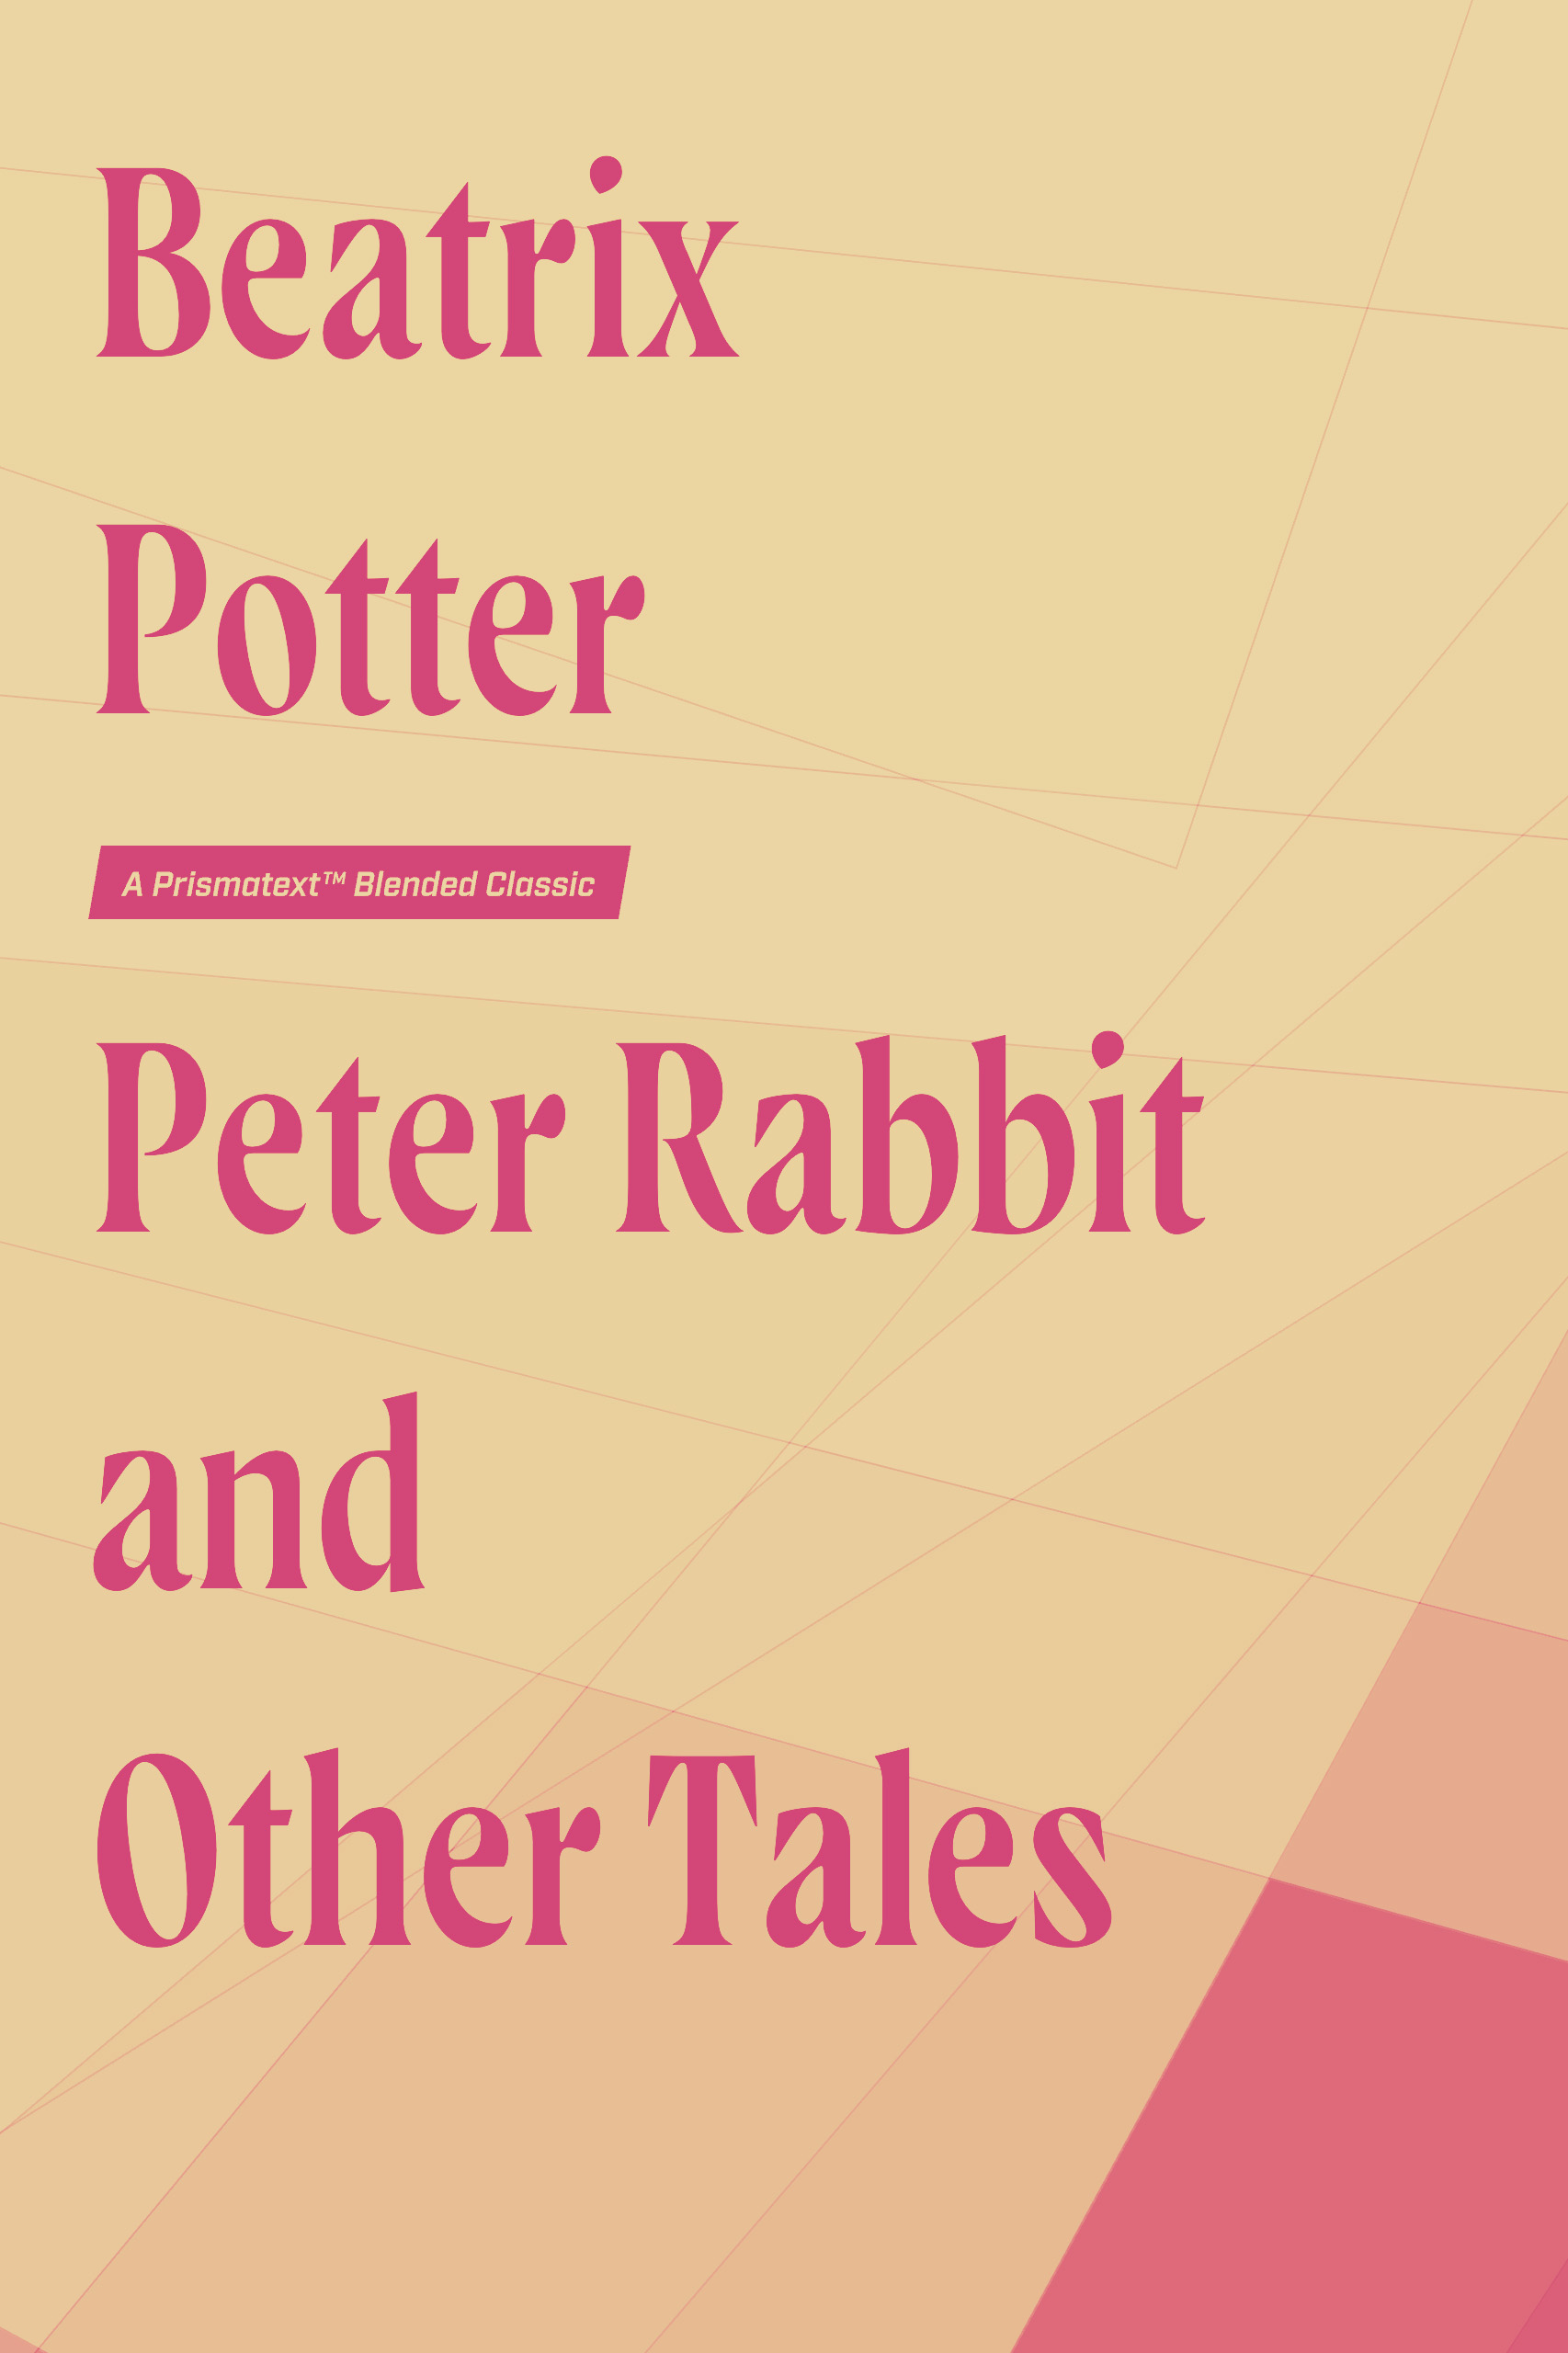 Peter Rabbit and Other Tales by Beatrix Potter